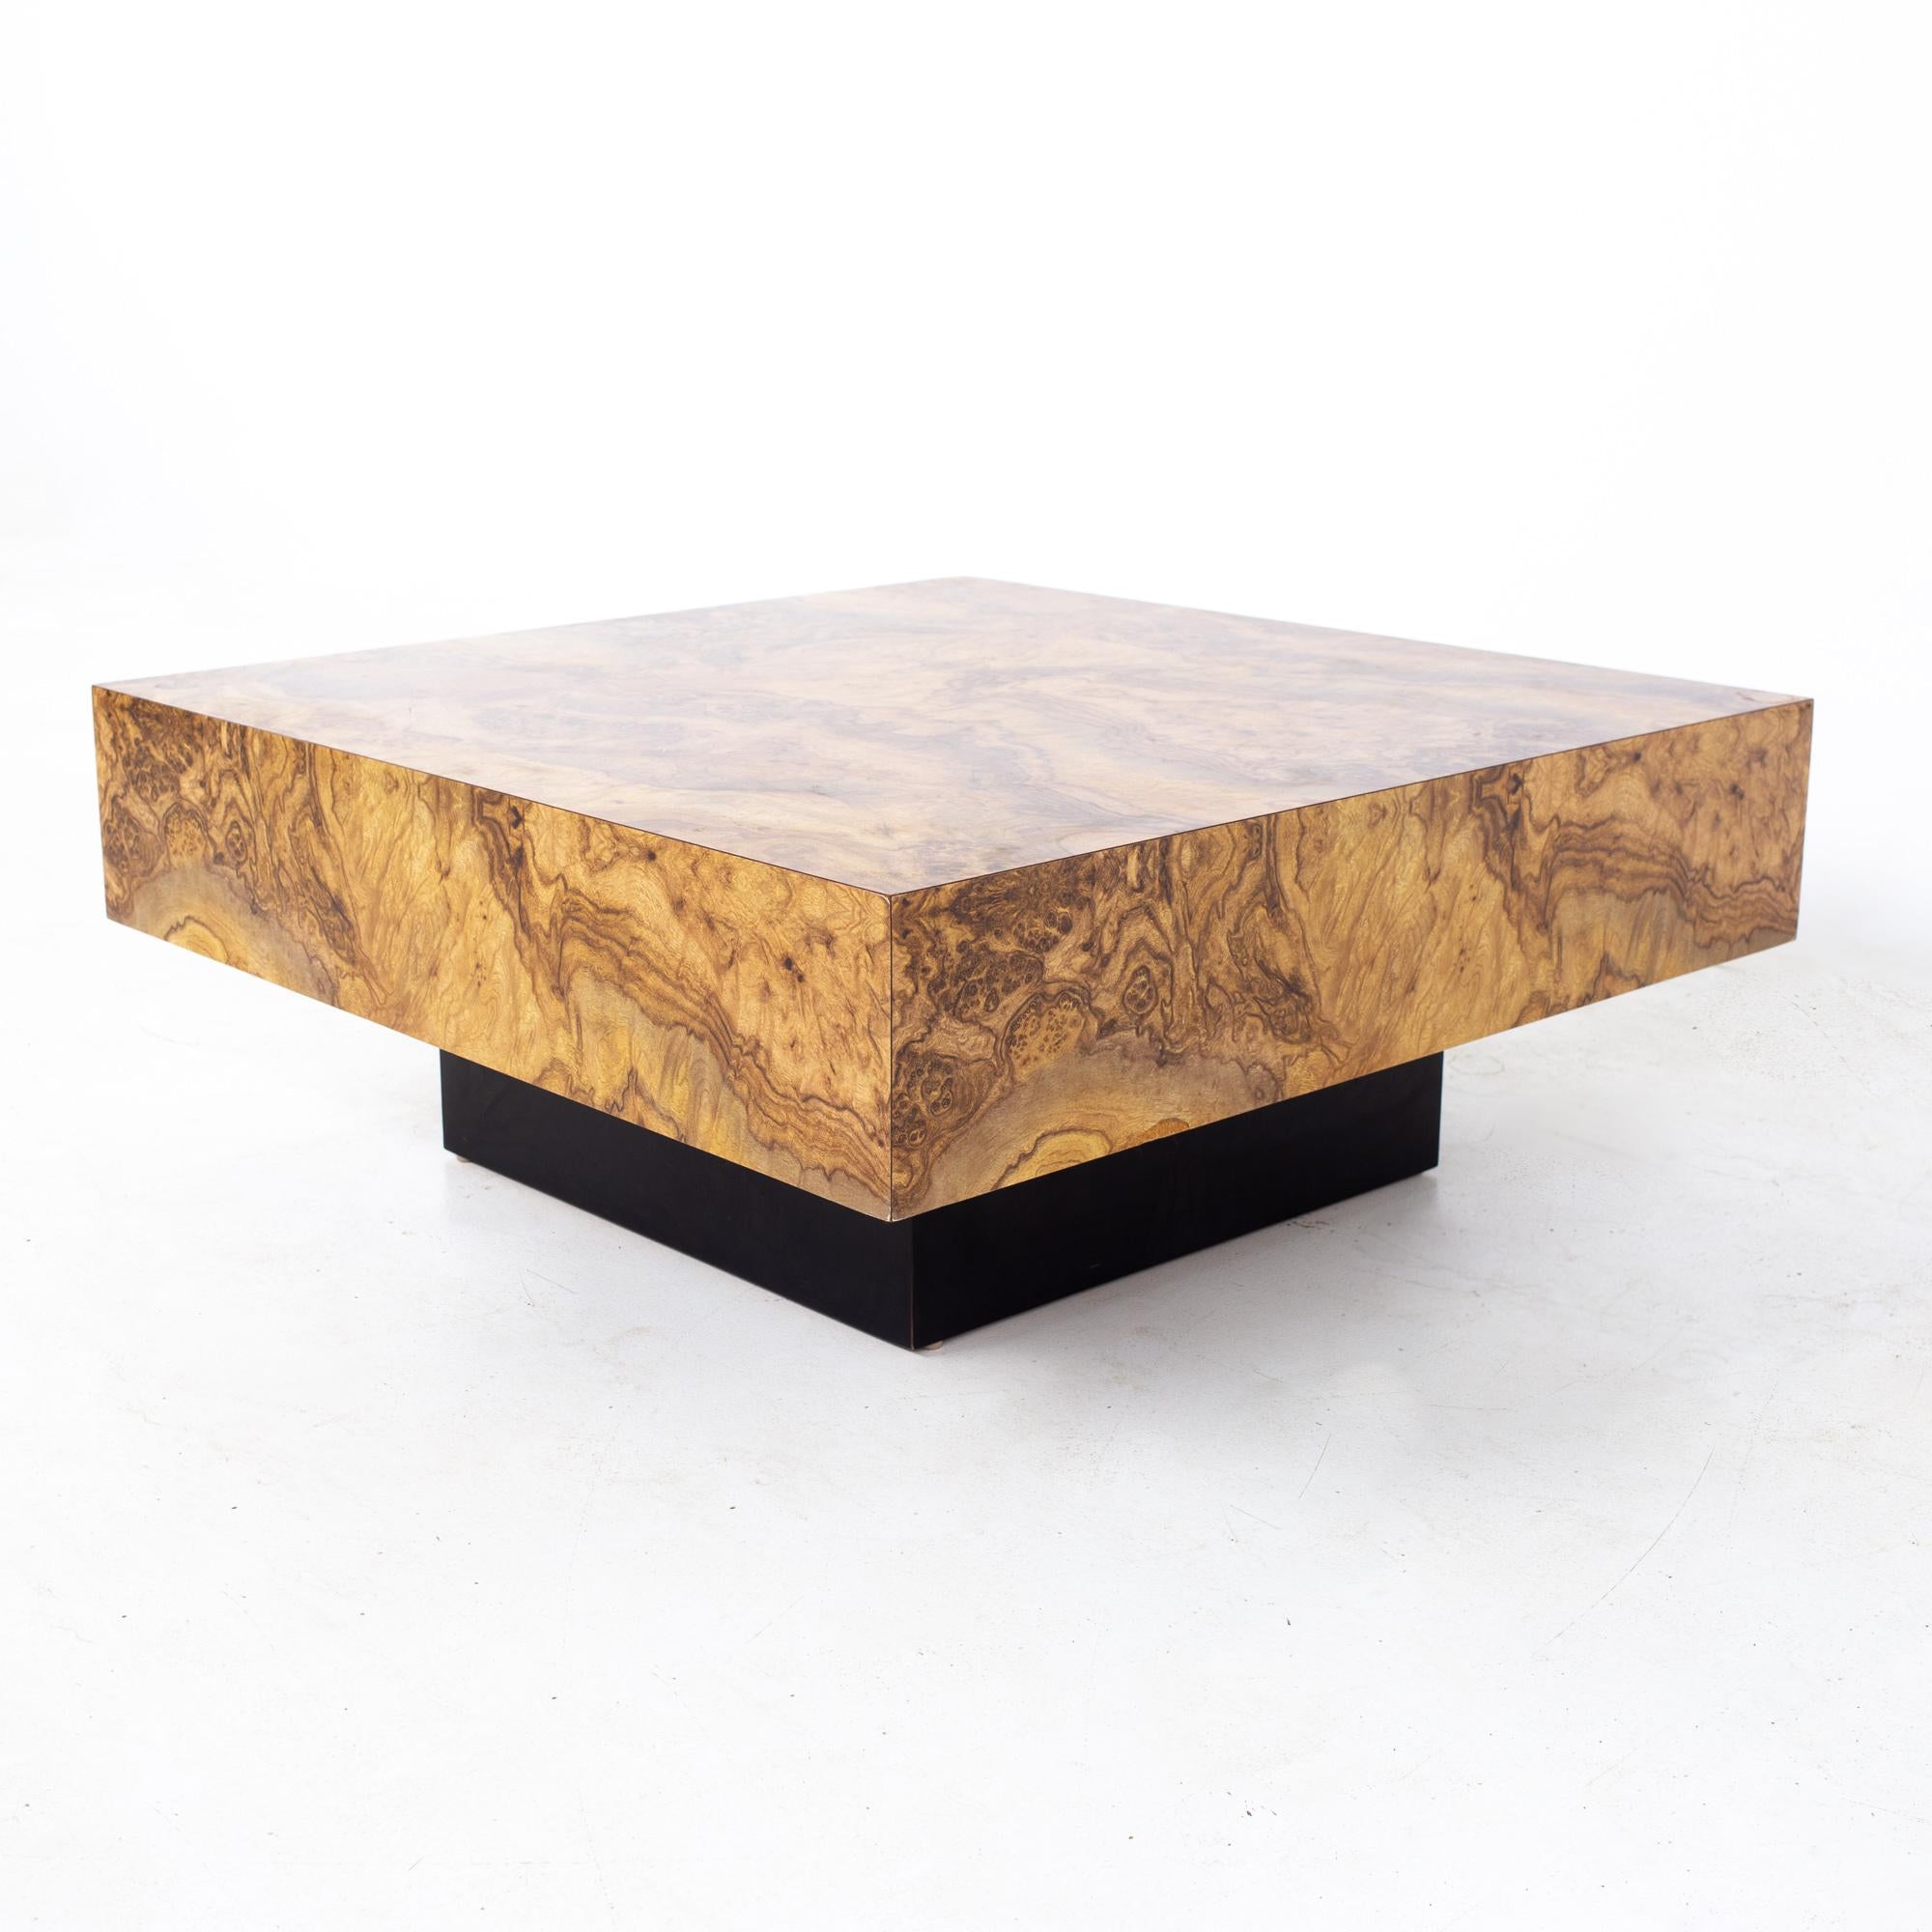 Milo Baughman style mid century burlwood laminate pedestal coffee table
Table measures: 36 wide x 36 deep x 14.5 inches high

All pieces of furniture can be had in what we call restored vintage condition. That means the piece is restored upon